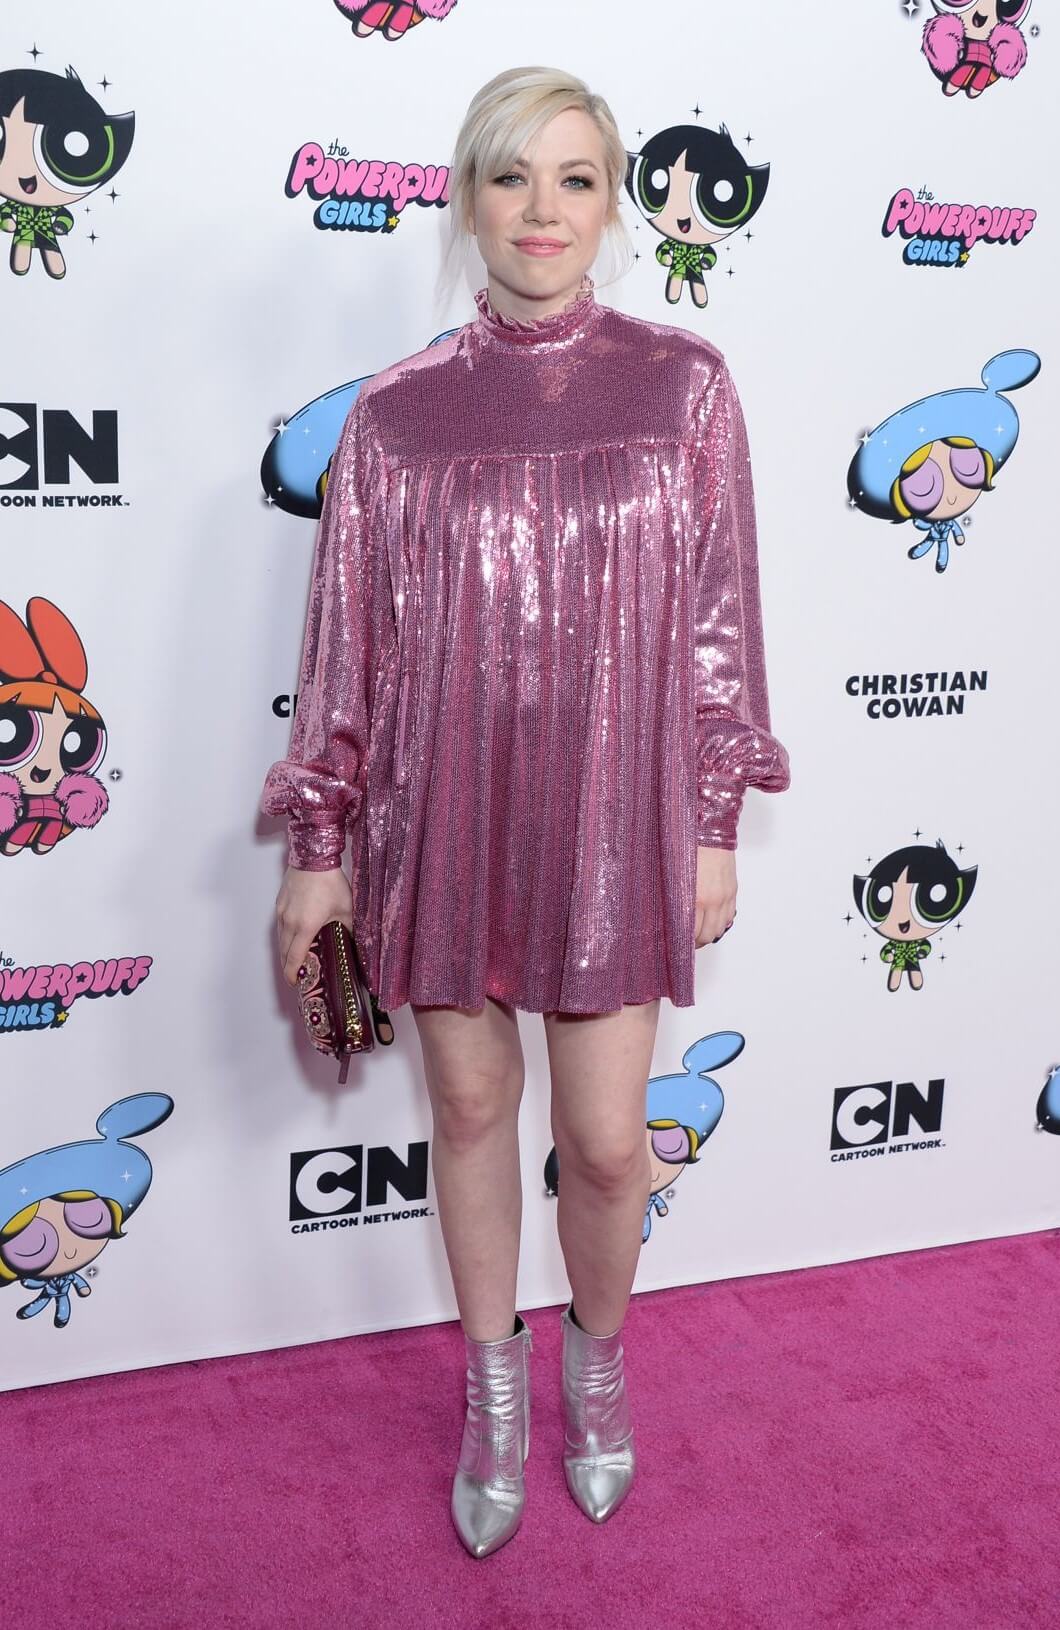 Carly Rae Jepsen  In Pink Shimmery Full Sleeves Short Dress At Christian Cowan x Powerpuff Girls Runway Show in Hollywood